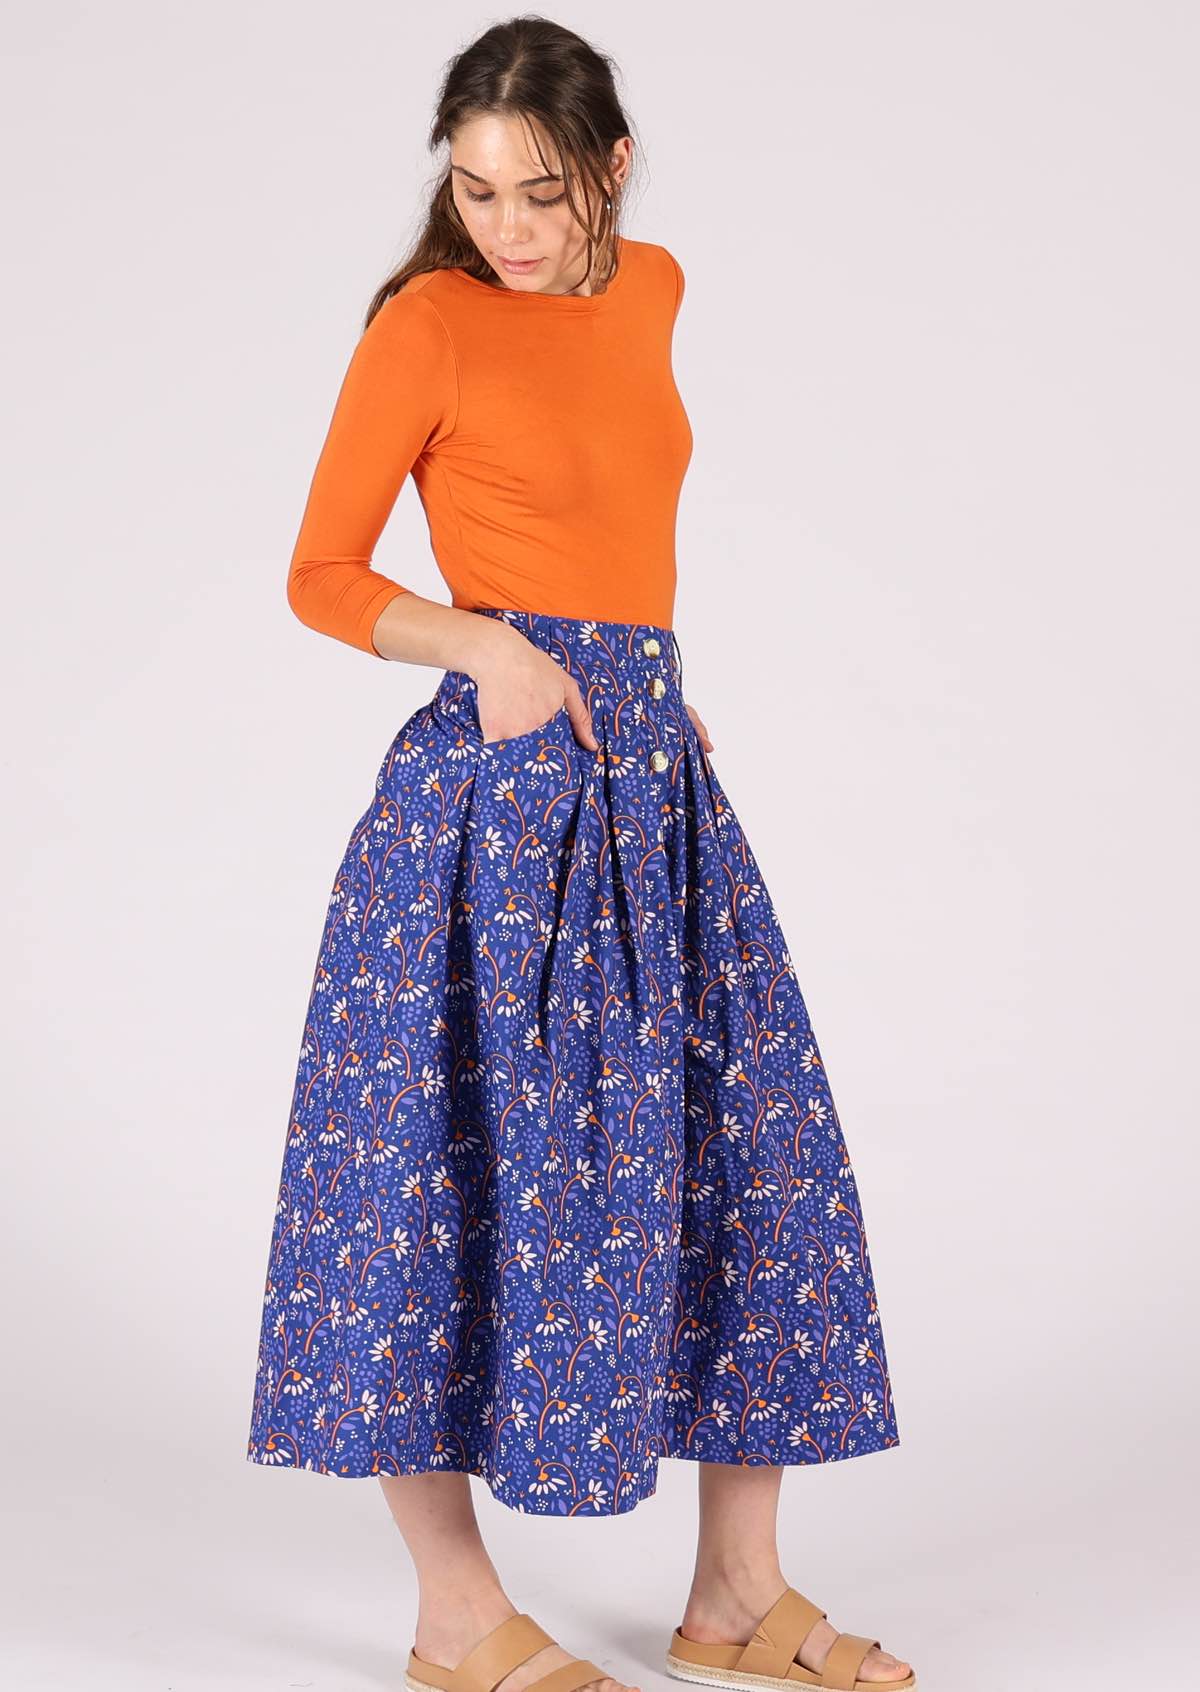 Model has her hands in the pockets of her 100% cotton, blue midi skirt. 